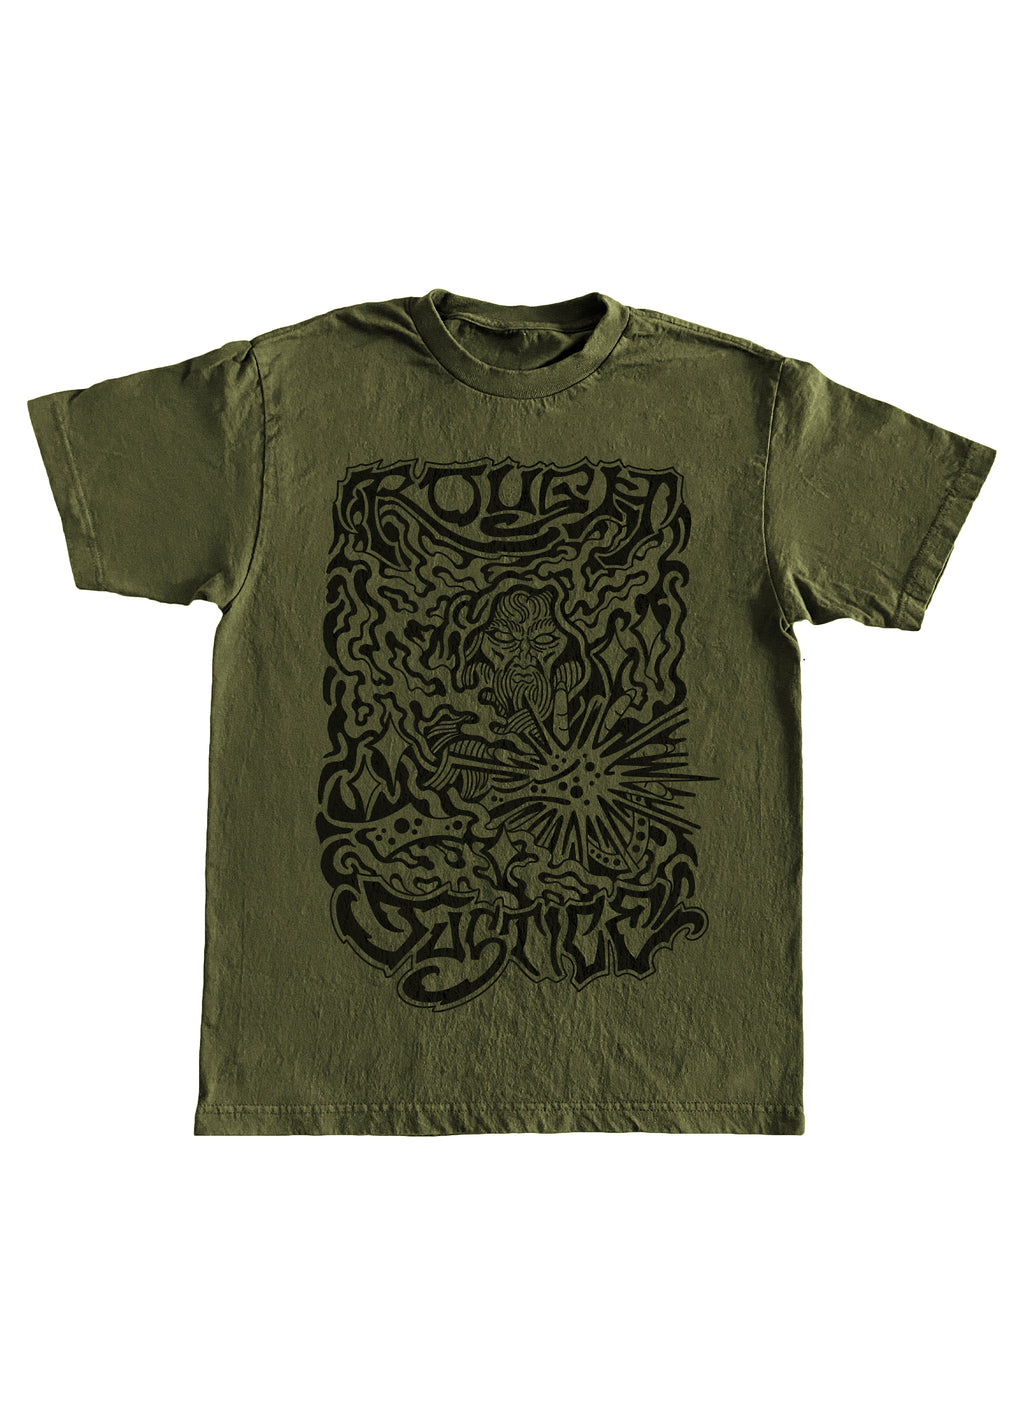 Rough Justice - Stoner T-Shirt